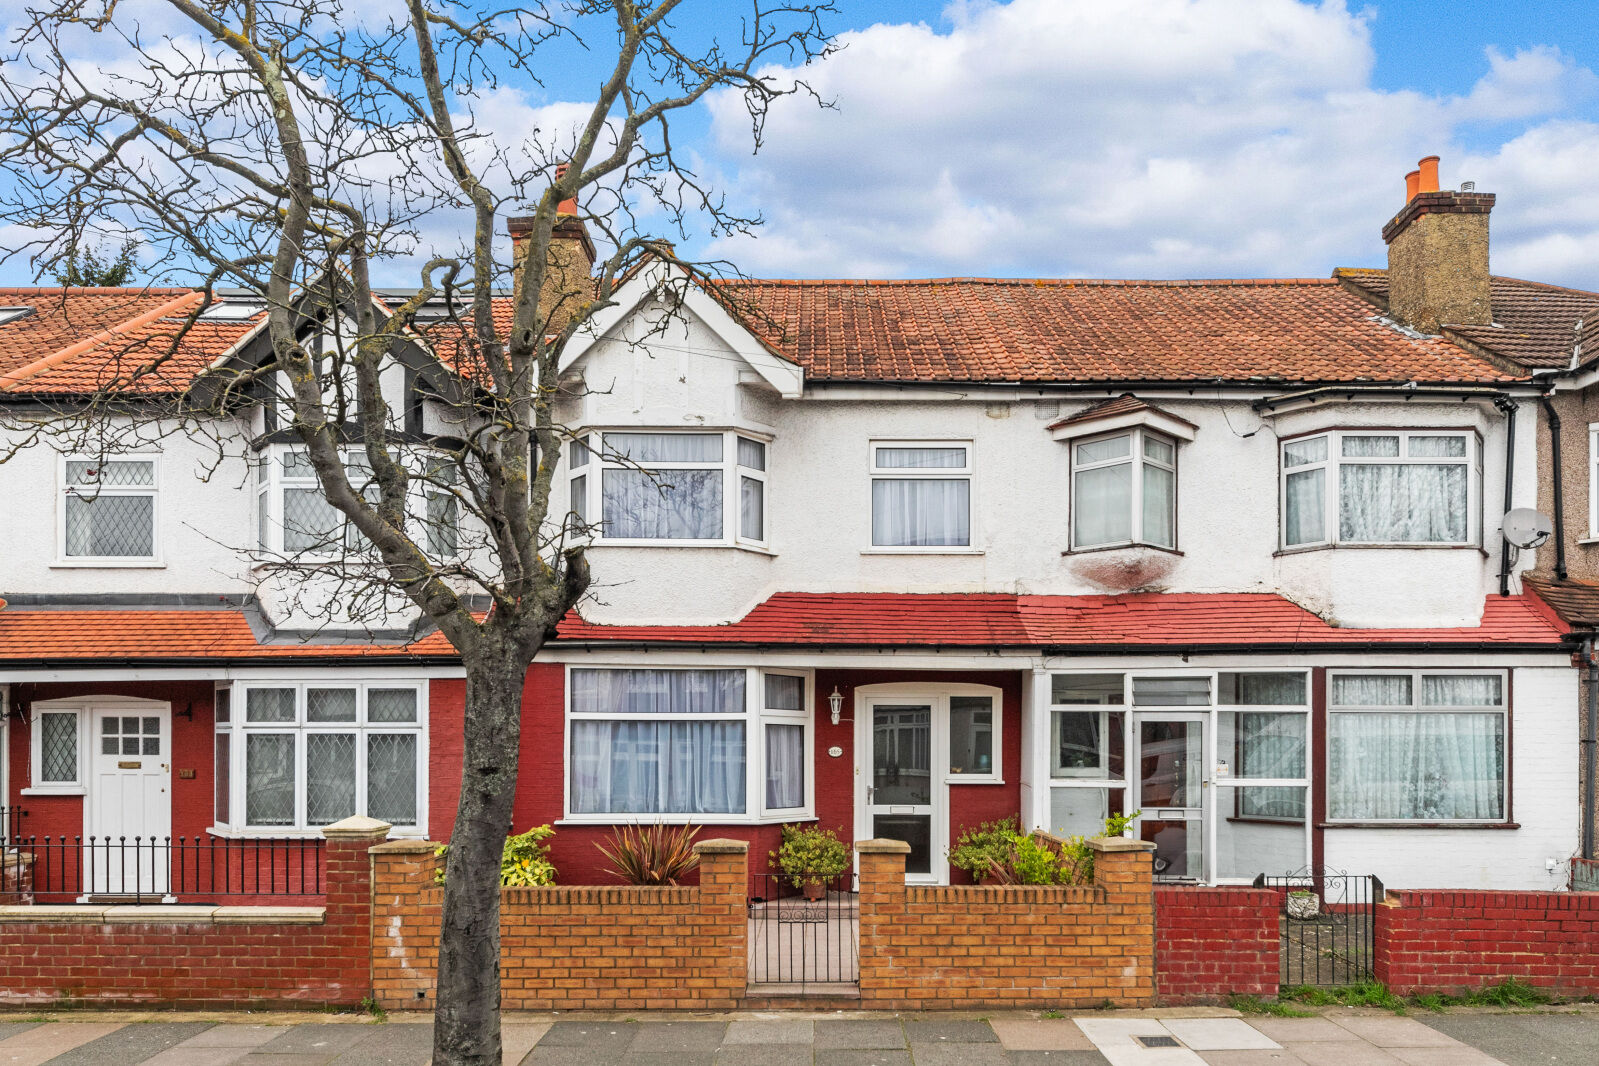 3 bedroom mid terraced house for sale Manor Road, Mitcham, CR4, main image